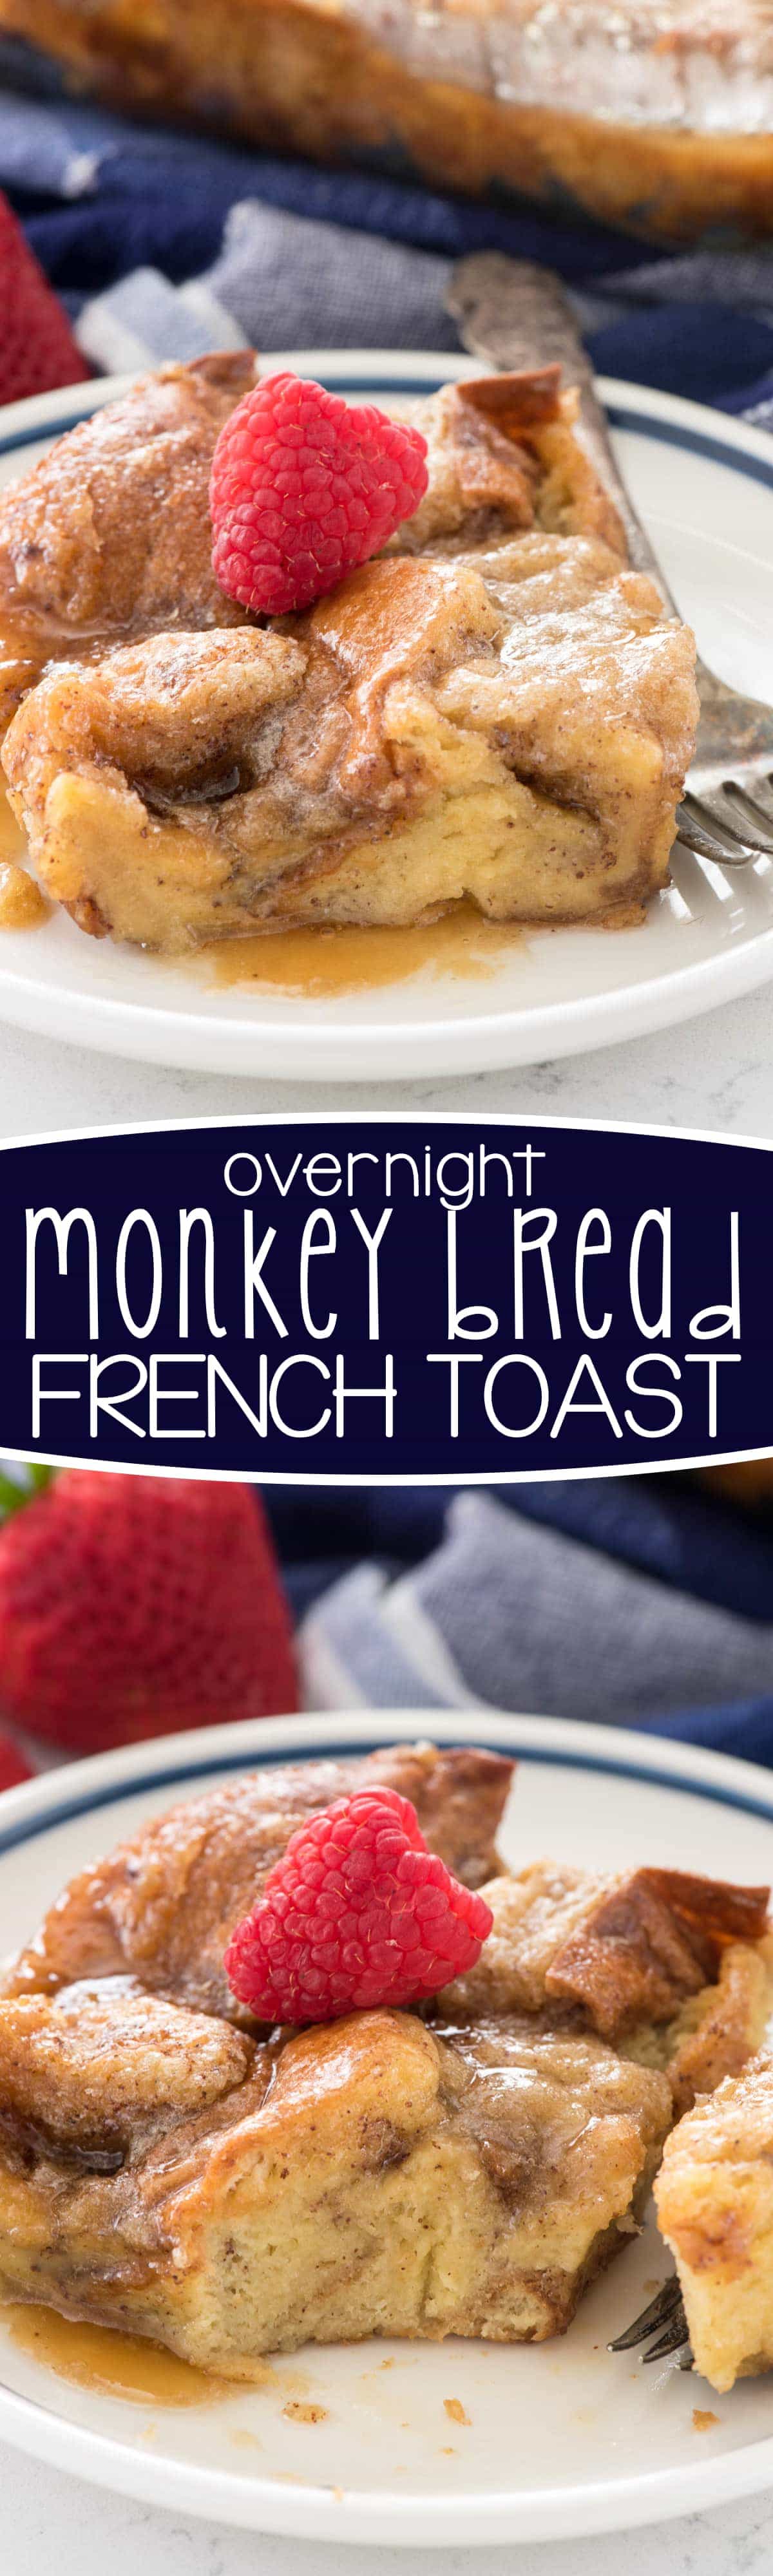 Overnight Monkey Bread French Toast Casserole - this easy breakfast recipe is perfect for any brunch! My family loved this casserole!